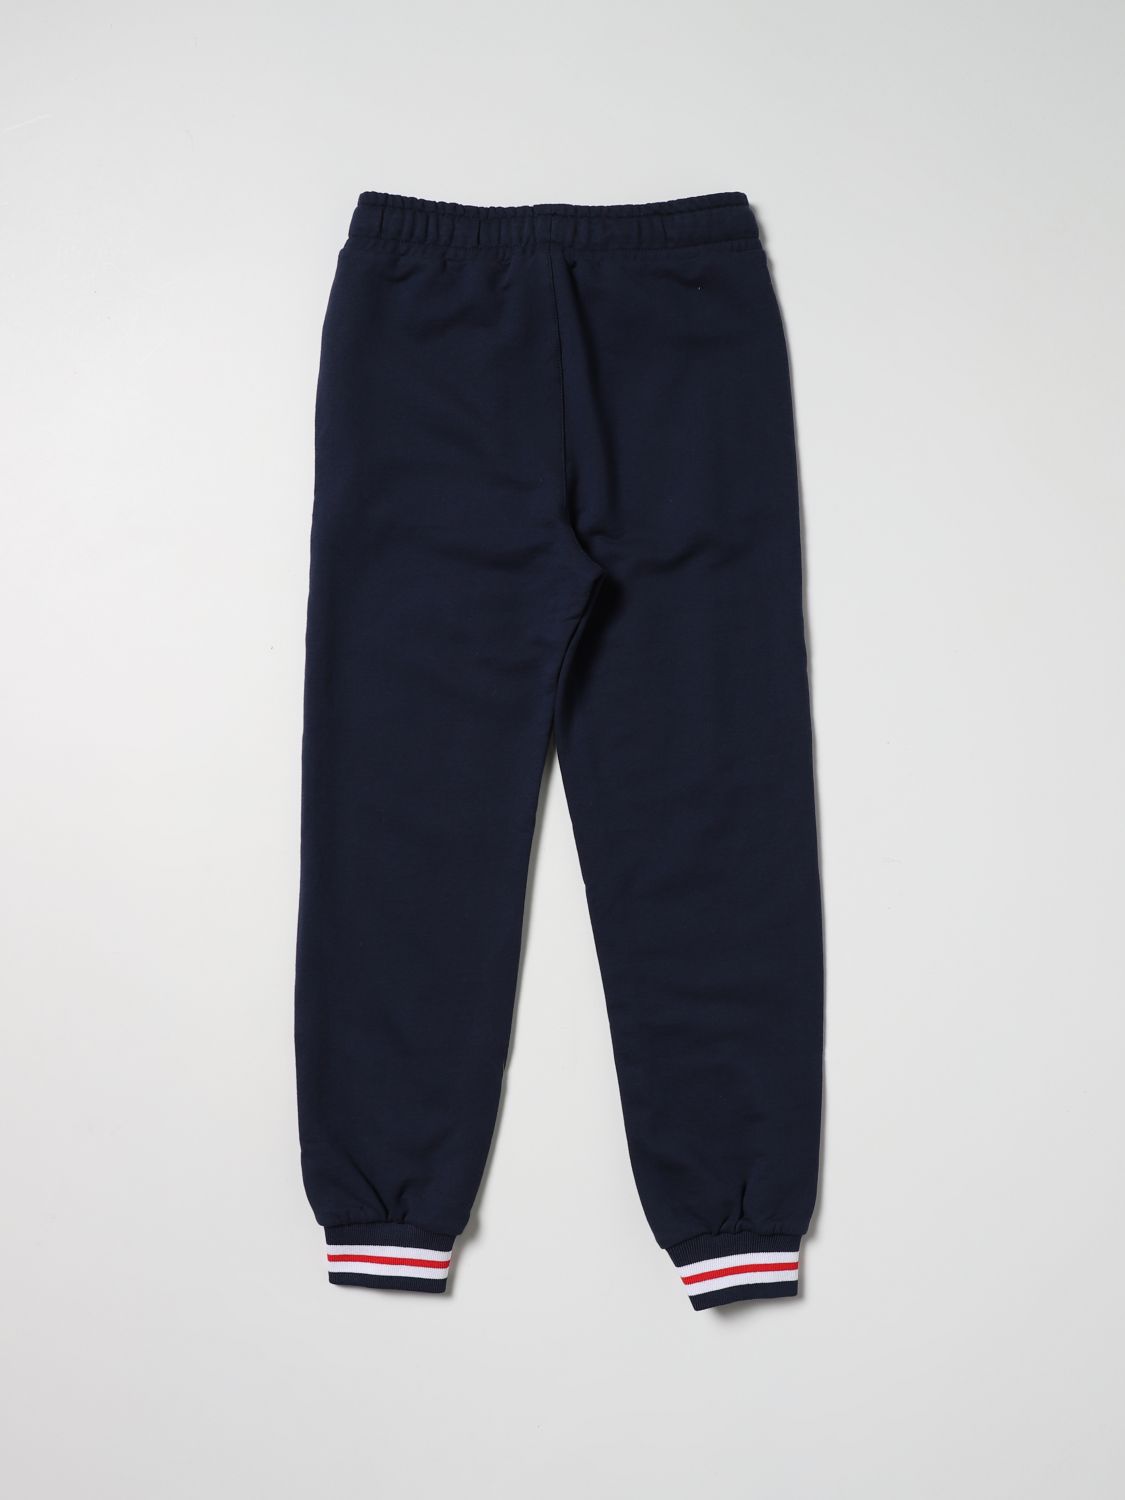 Trousers Peuterey: Peuterey trousers for boy navy 2